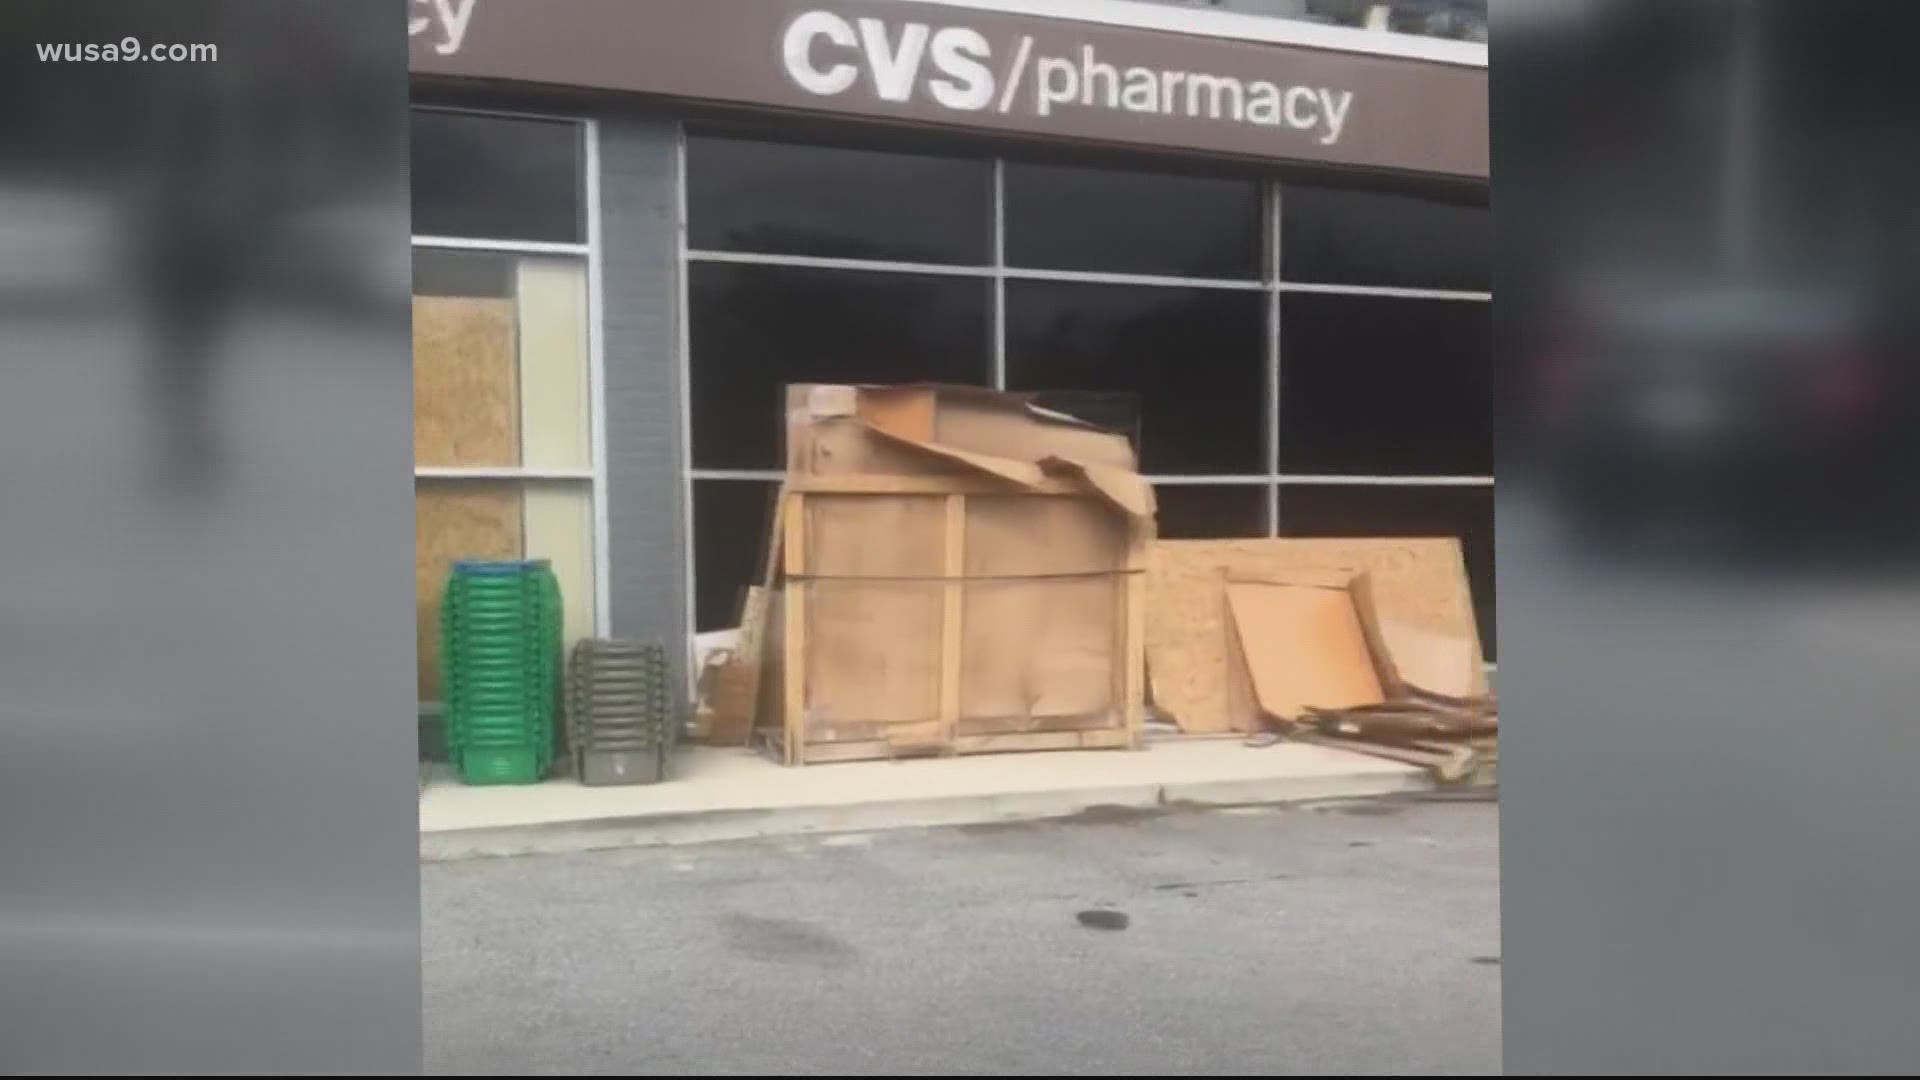 Fed up with the mess outside the CVS in the Penn Branch Shopping Center in Southeast, Dr. Jalan Burton pulled out her cellphone and pressed record.